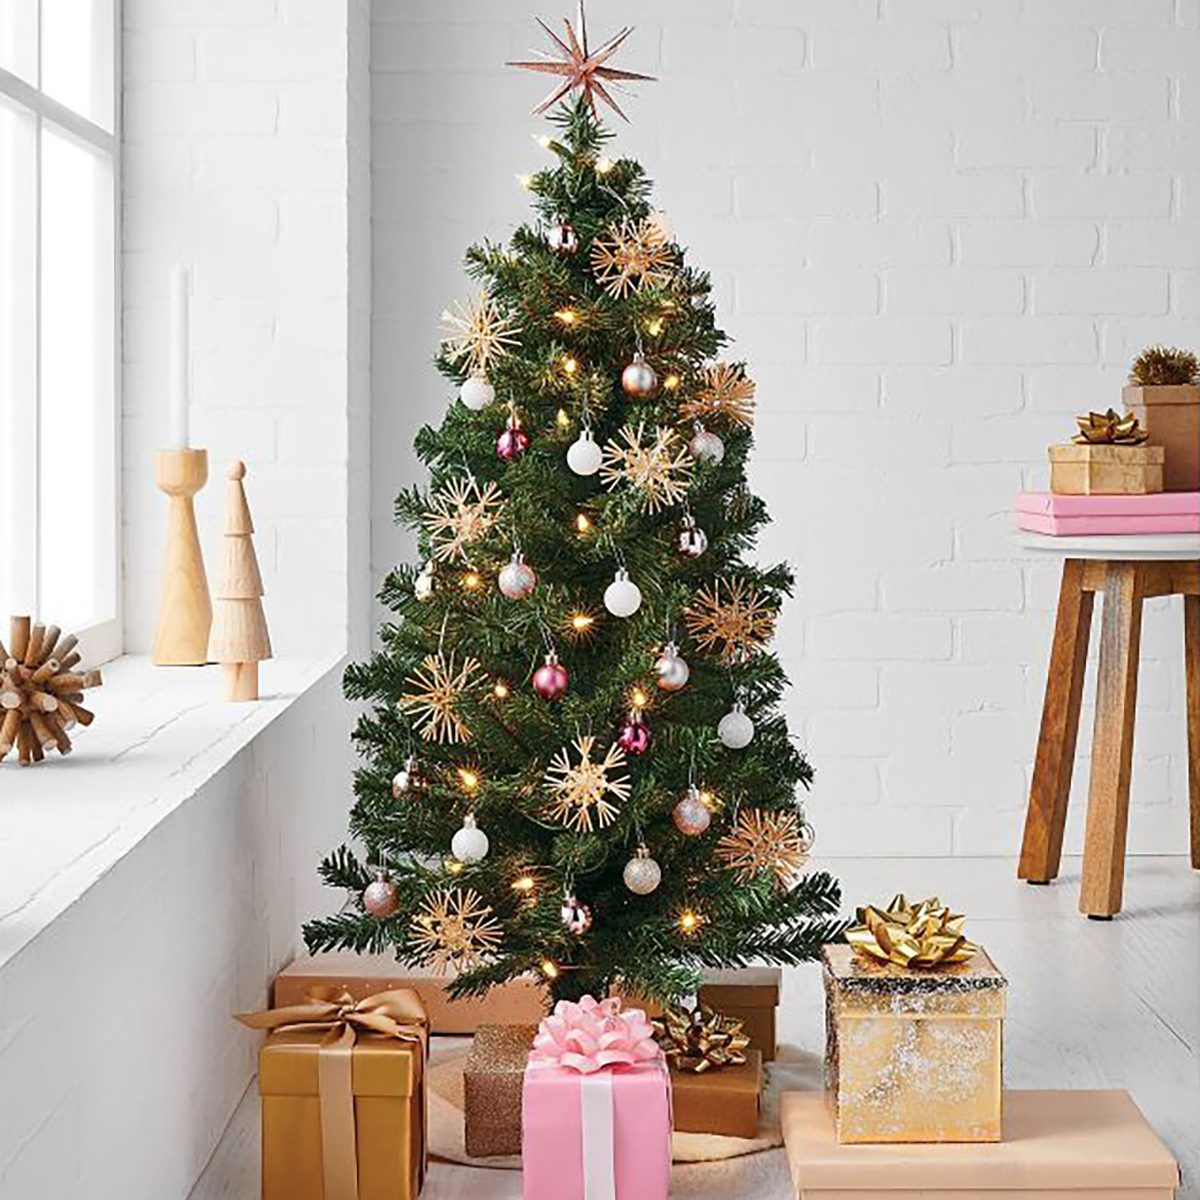 3 Secrets for Decorating Your Christmas Tree – Our Beautifully